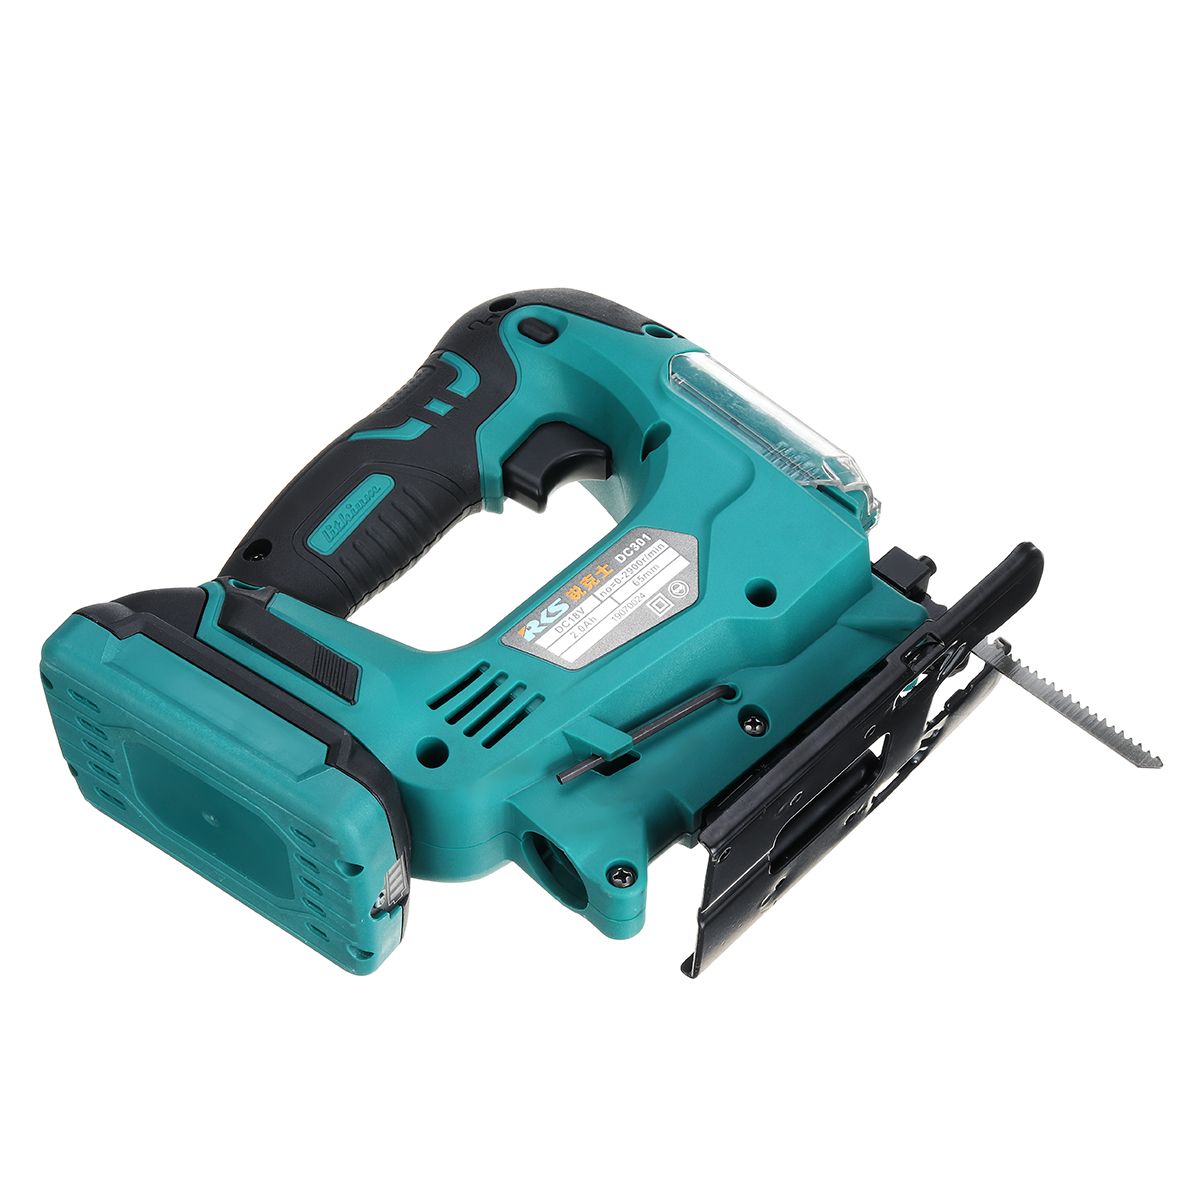 18V-900W-Electric-Jig-Saw-Power-Tool-Cordless-Quick-Blade-Change-Electric-Saw-LED-Light-1574371